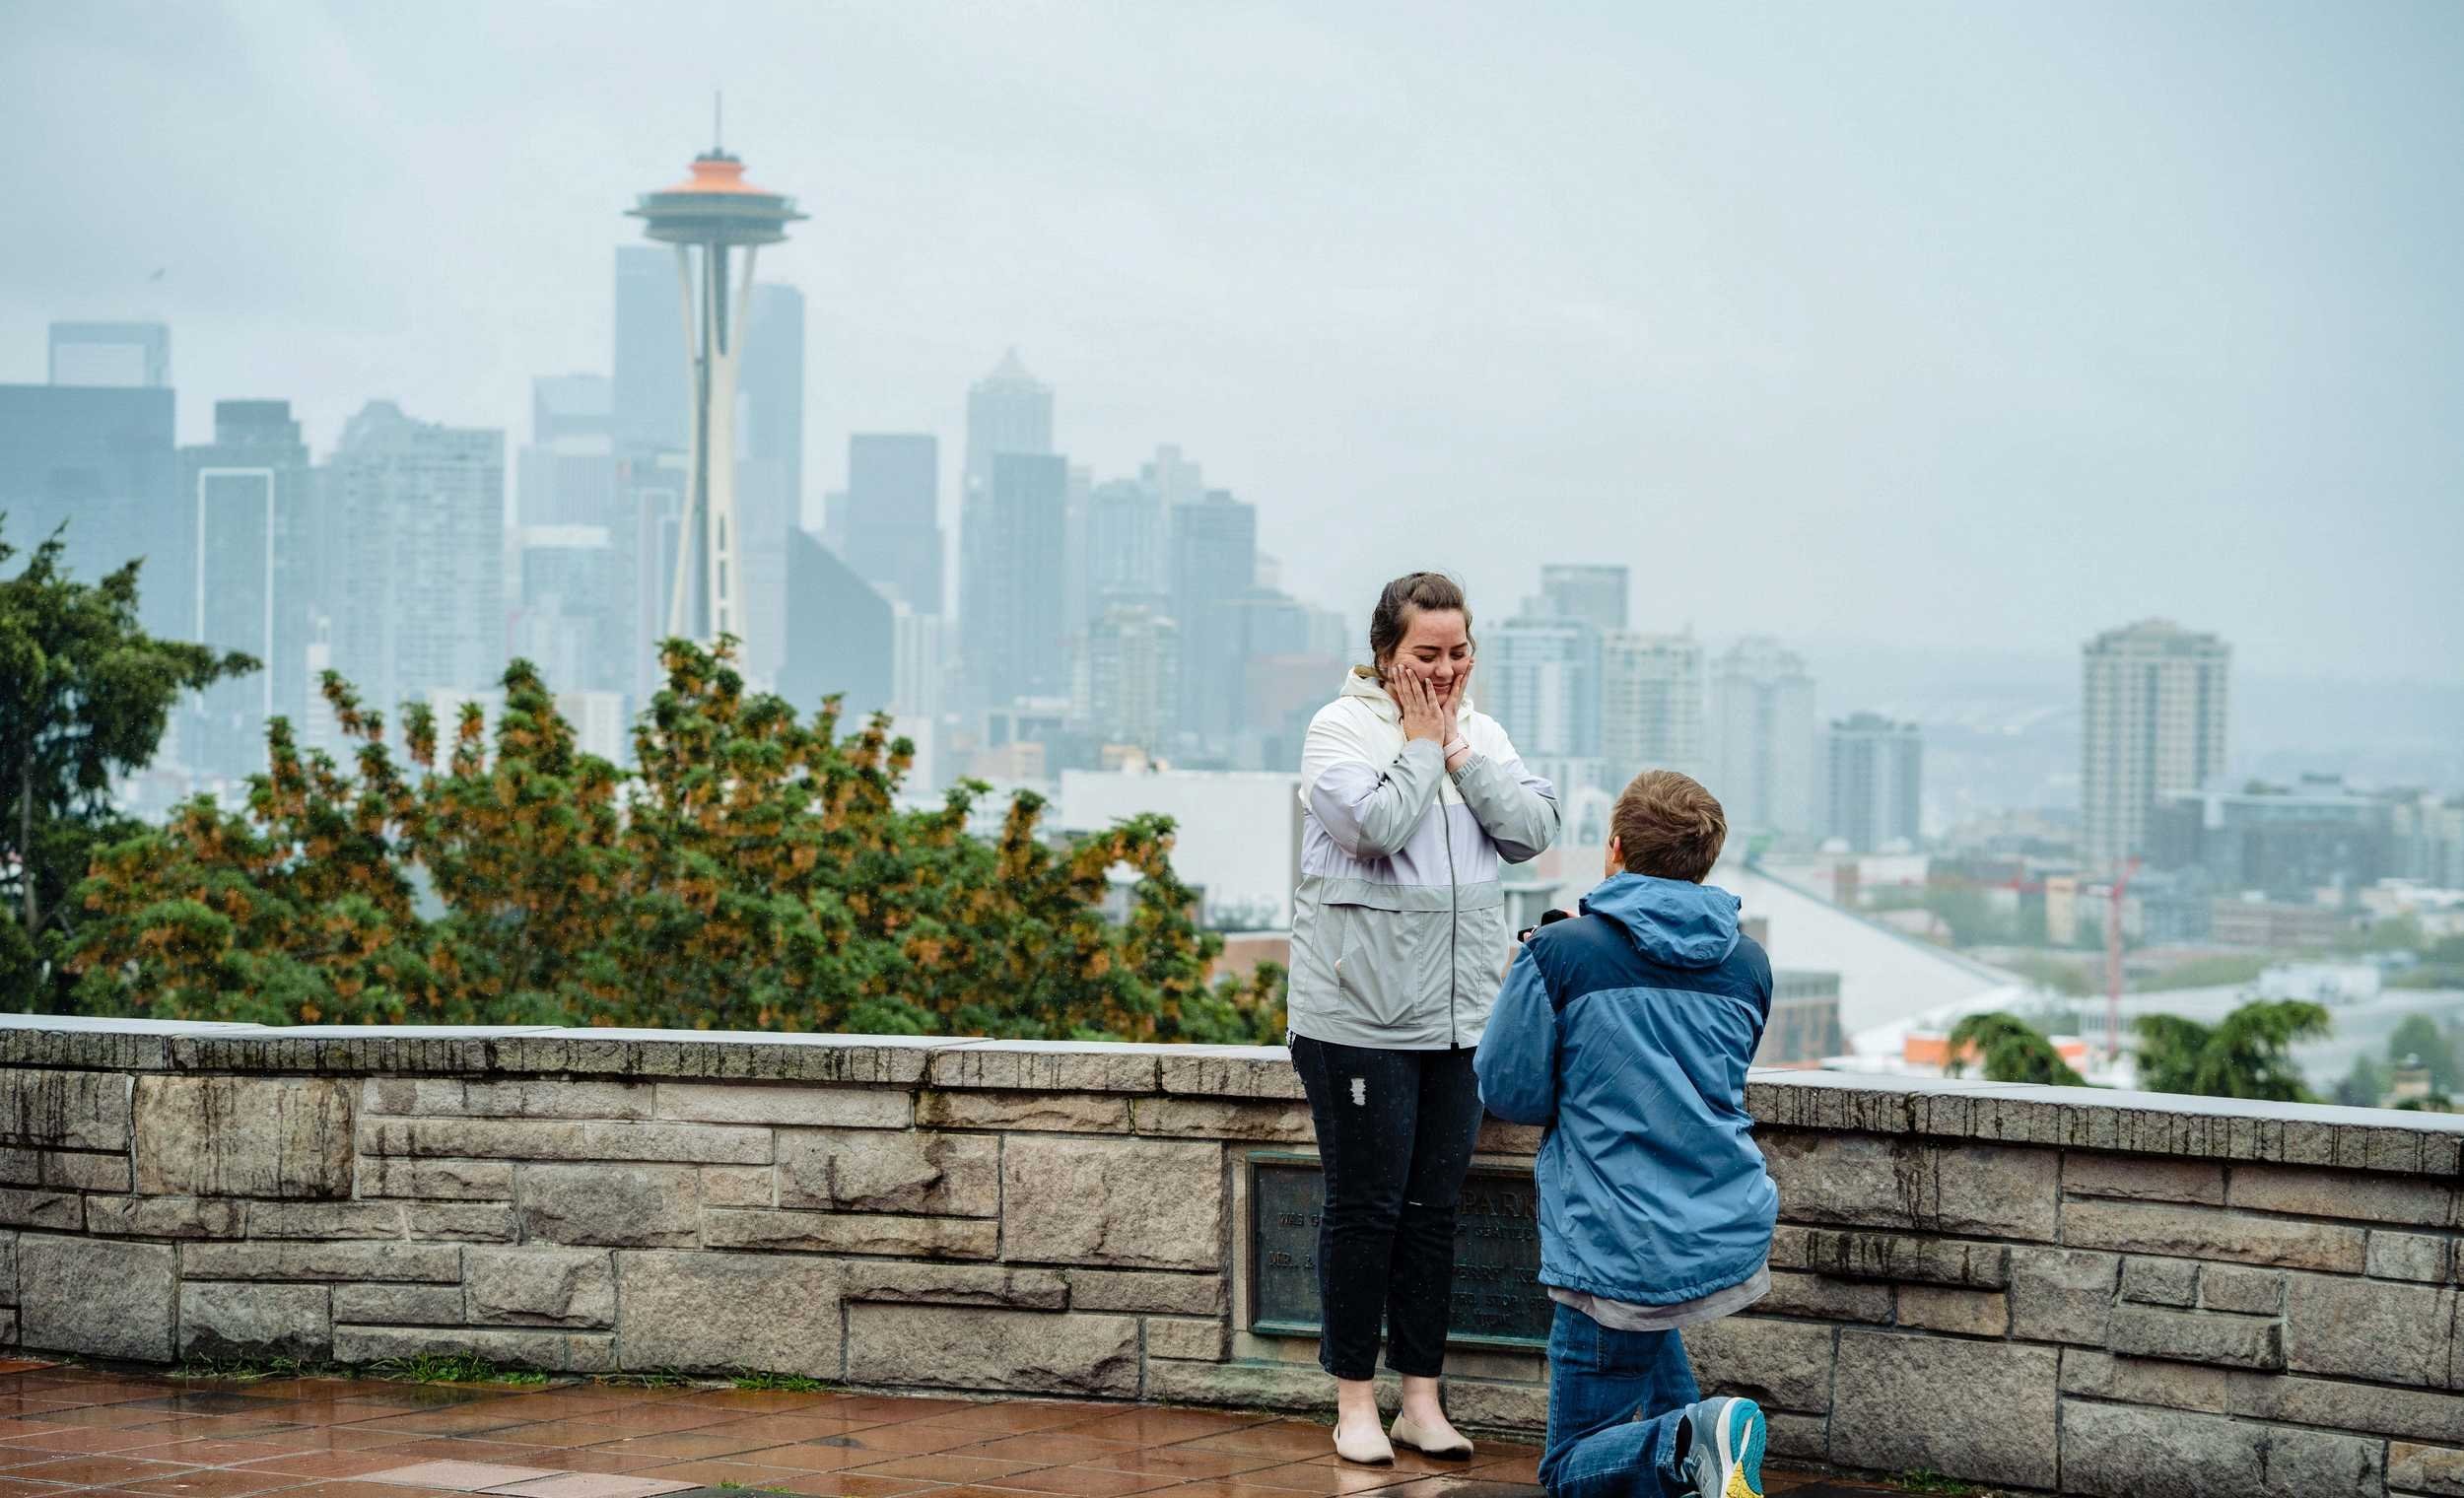 Things You Can Do at Kerry Park